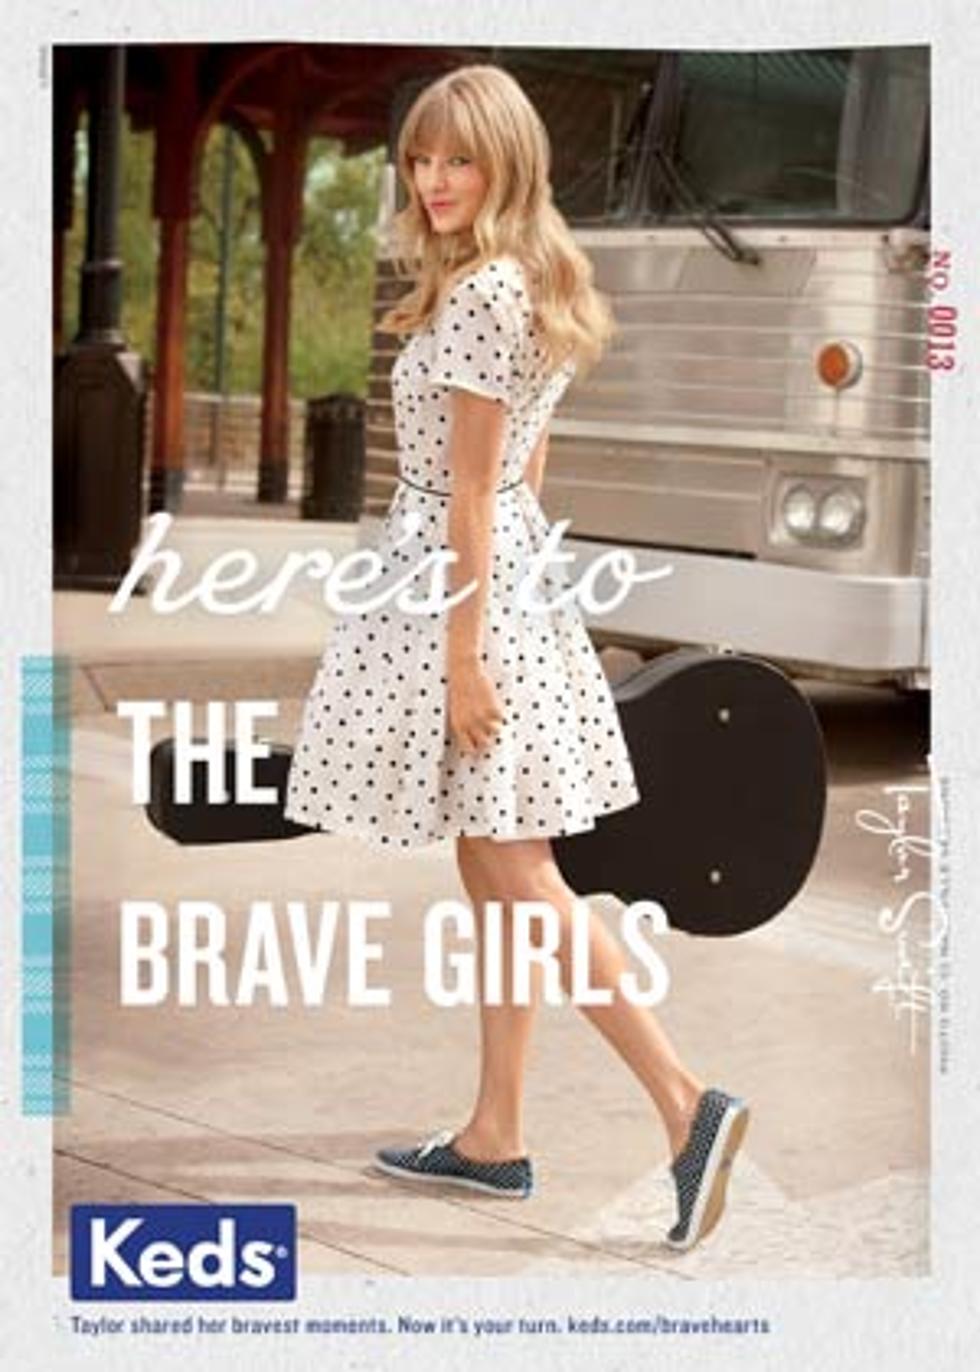 Taylor Swift Inspires Girls Through Keds Bravehearts Campaign